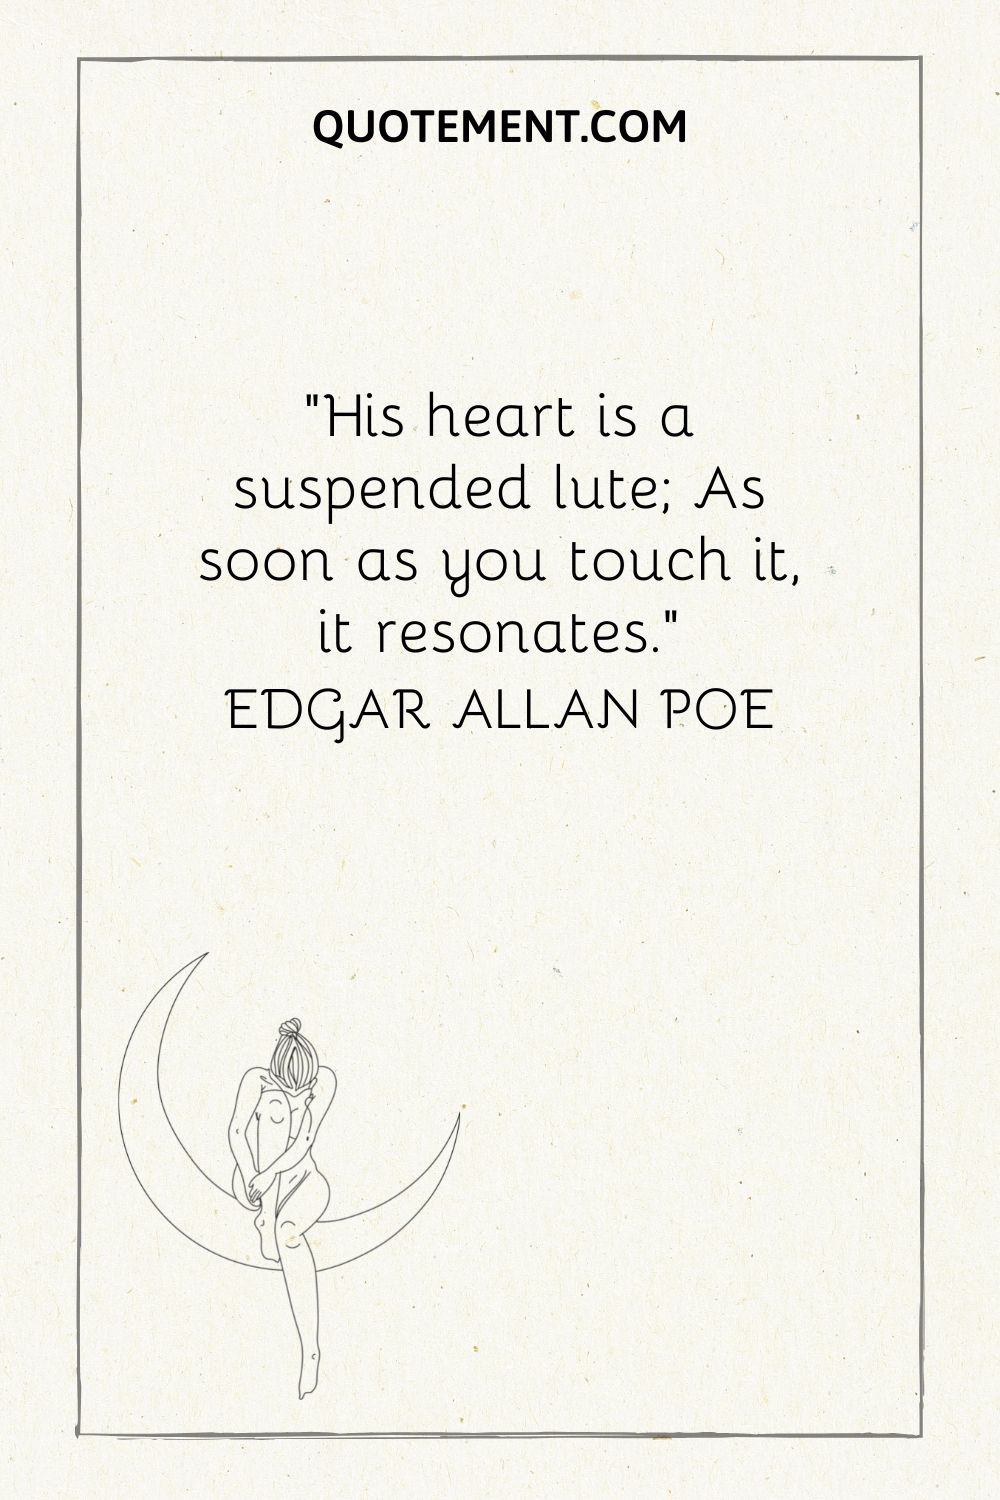 “His heart is a suspended lute; As soon as you touch it, it resonates.” — Edgar Allan Poe